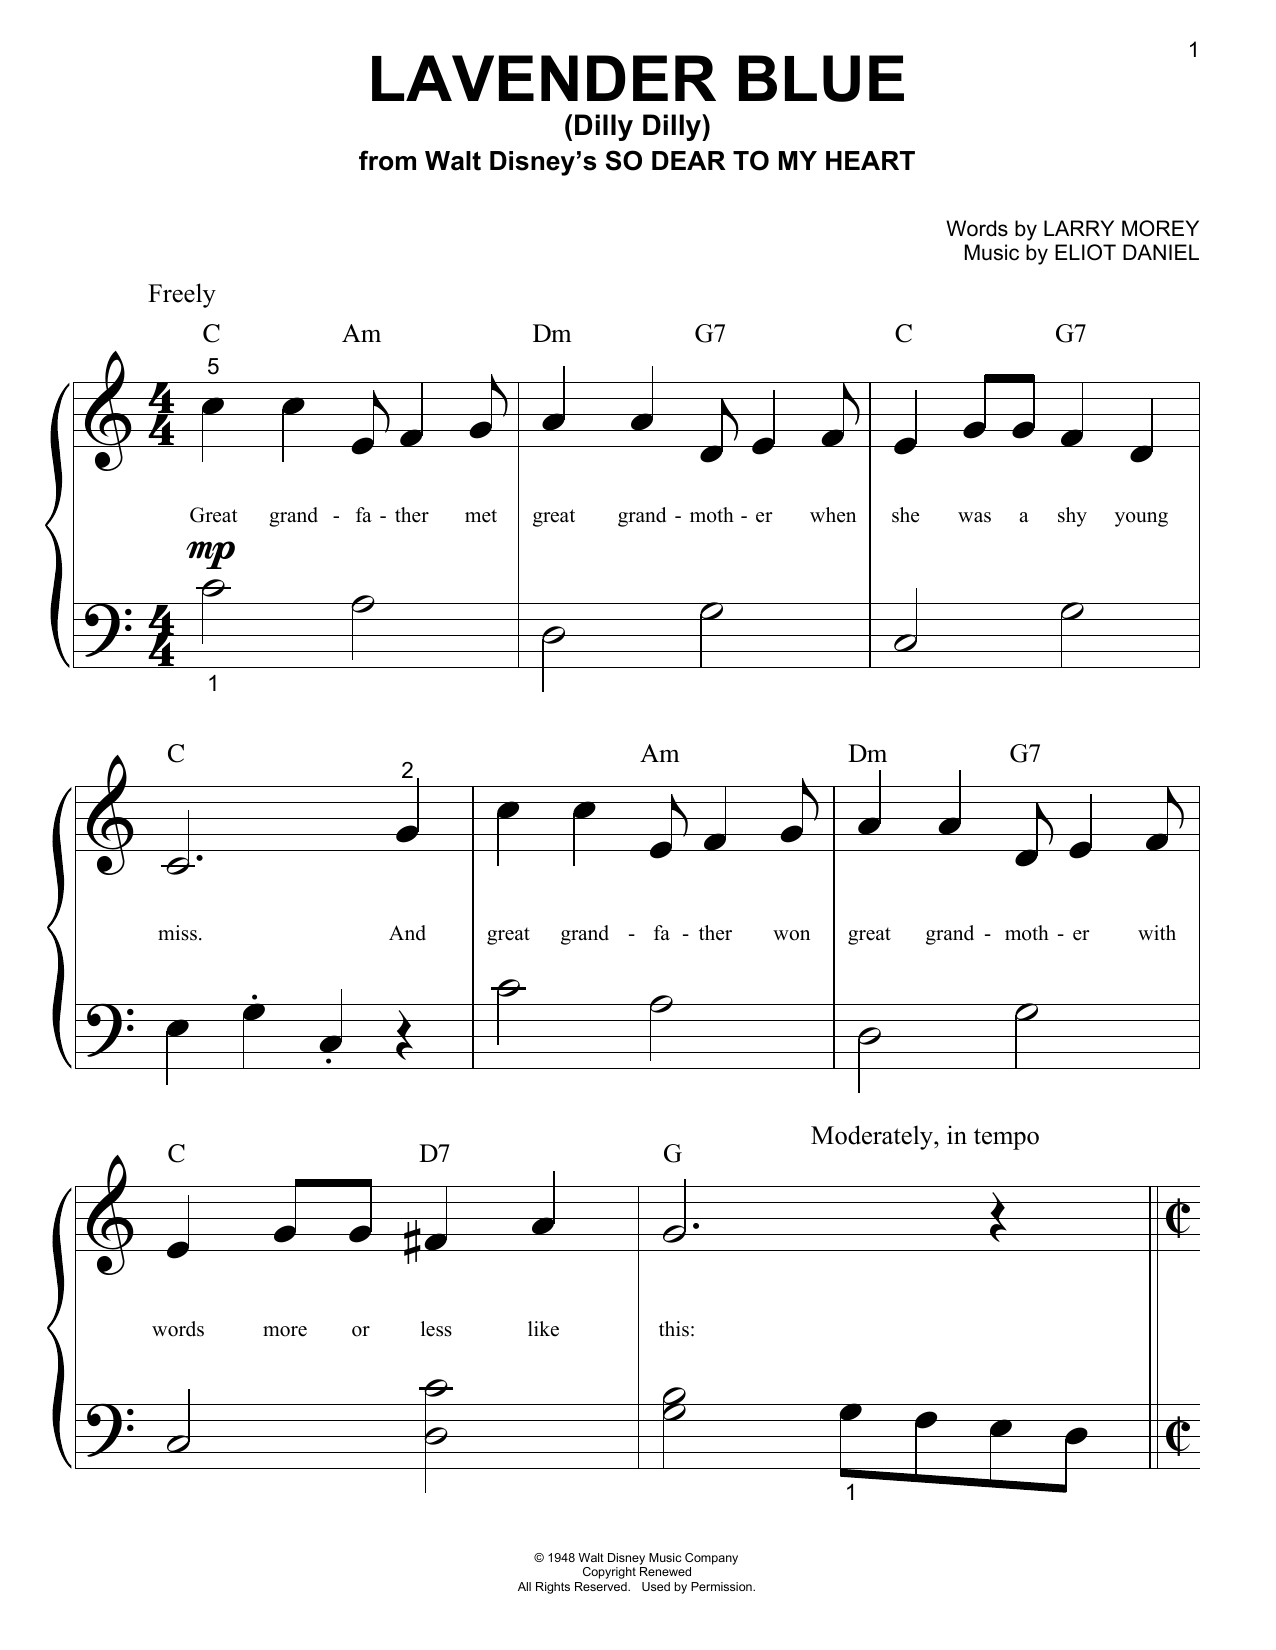 Download Eliot Daniel Lavender Blue (Dilly Dilly) Sheet Music